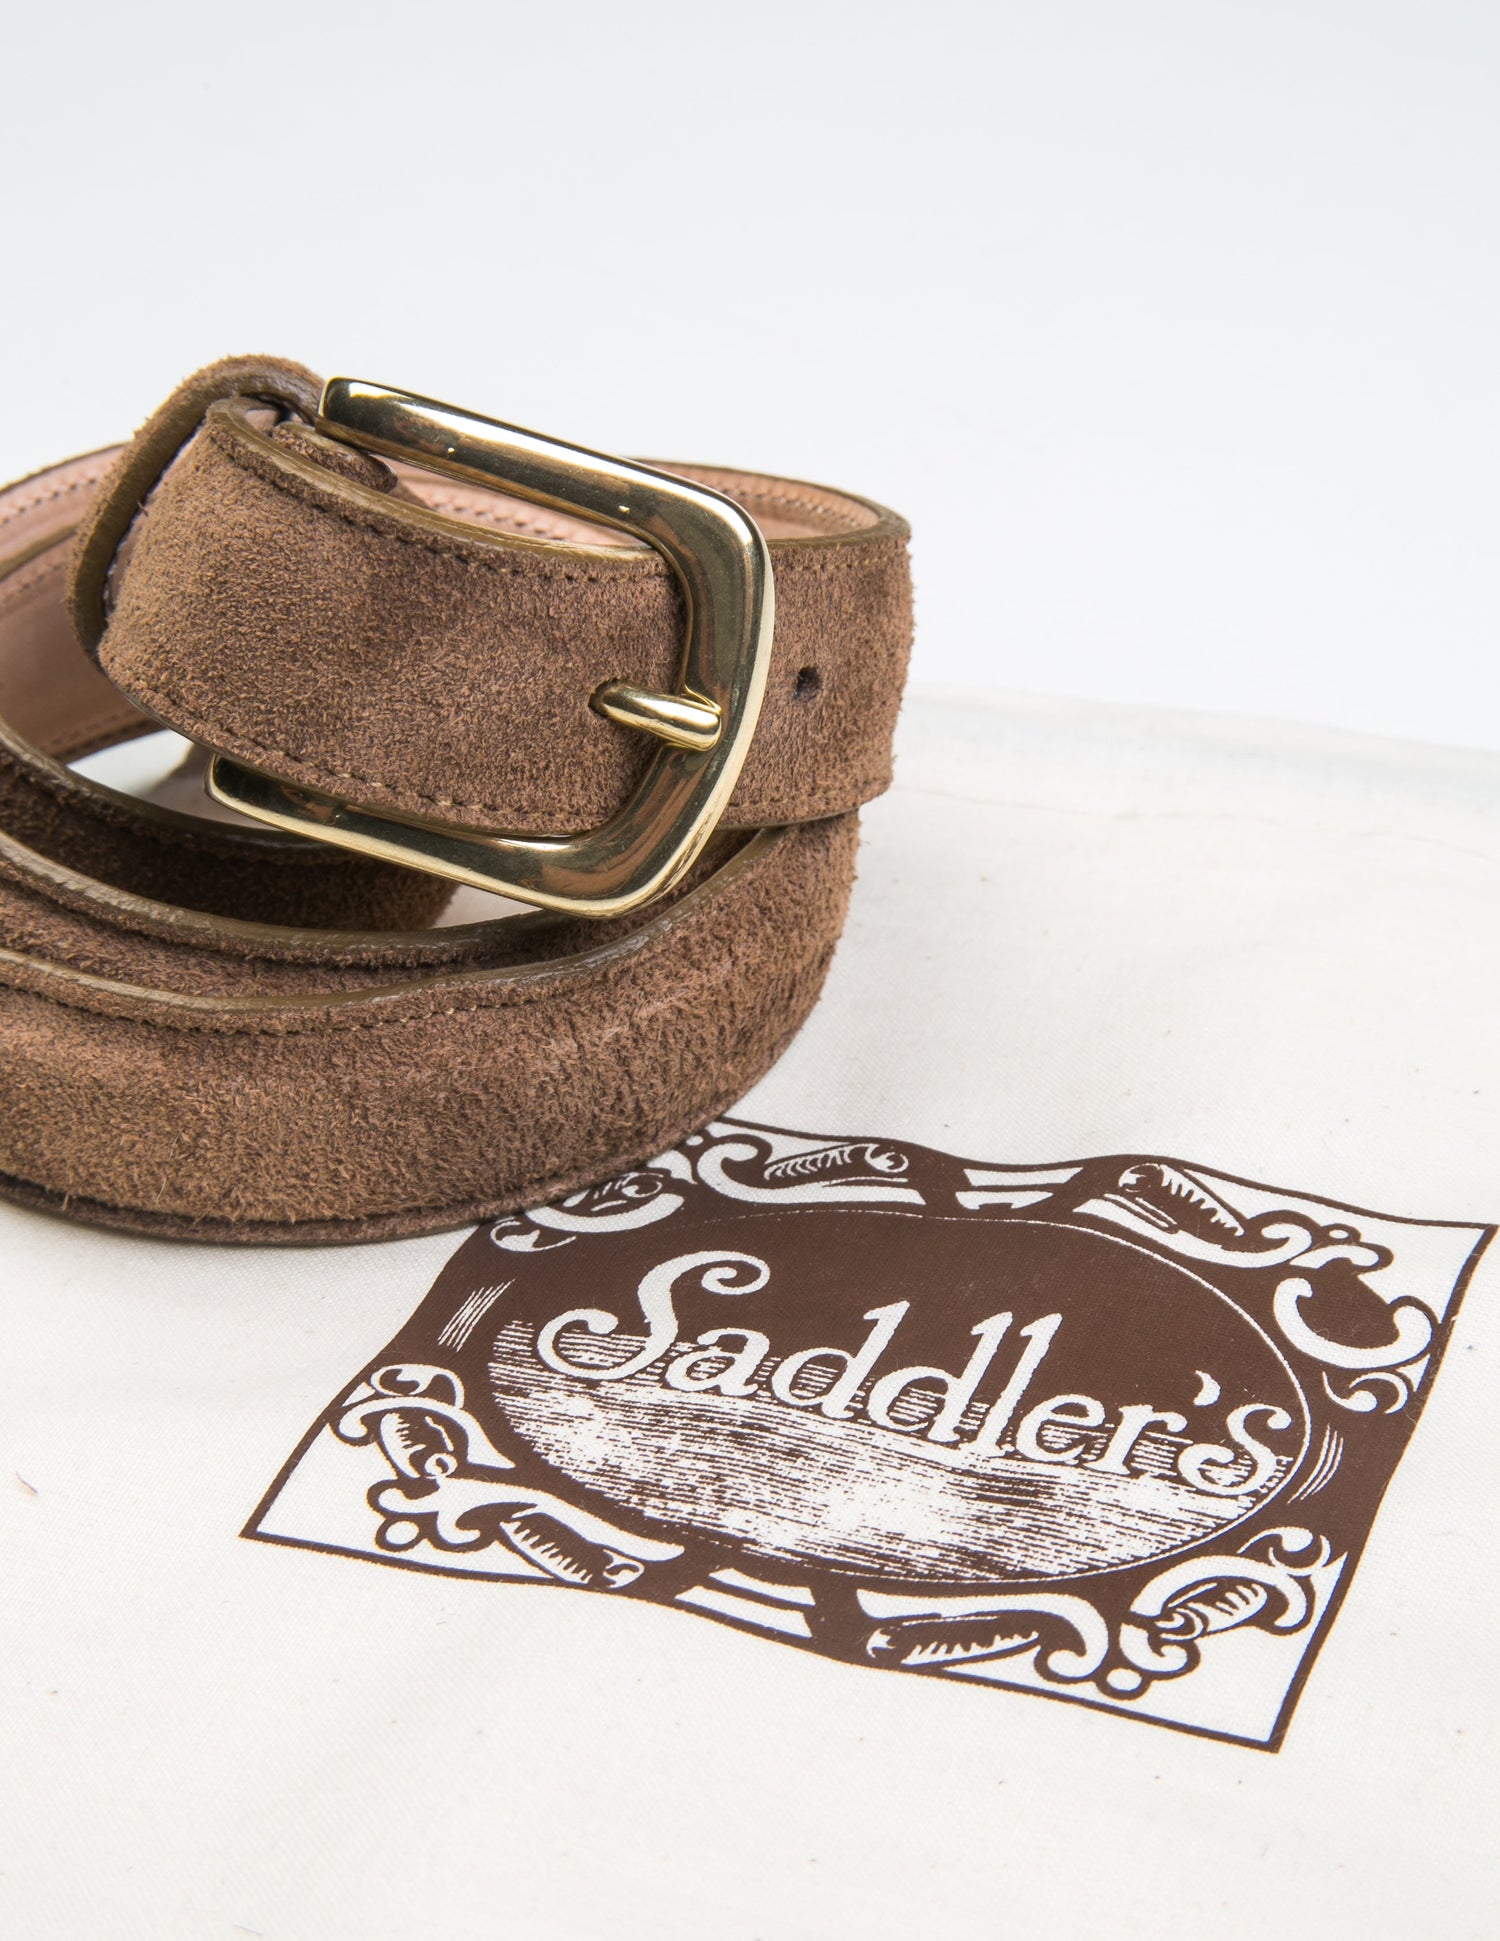 Photo of Brooklyn Tailors x Saddler's 25mm Belt in Suede Leather - Clay coiled next to the fabric bag it is sold with. 